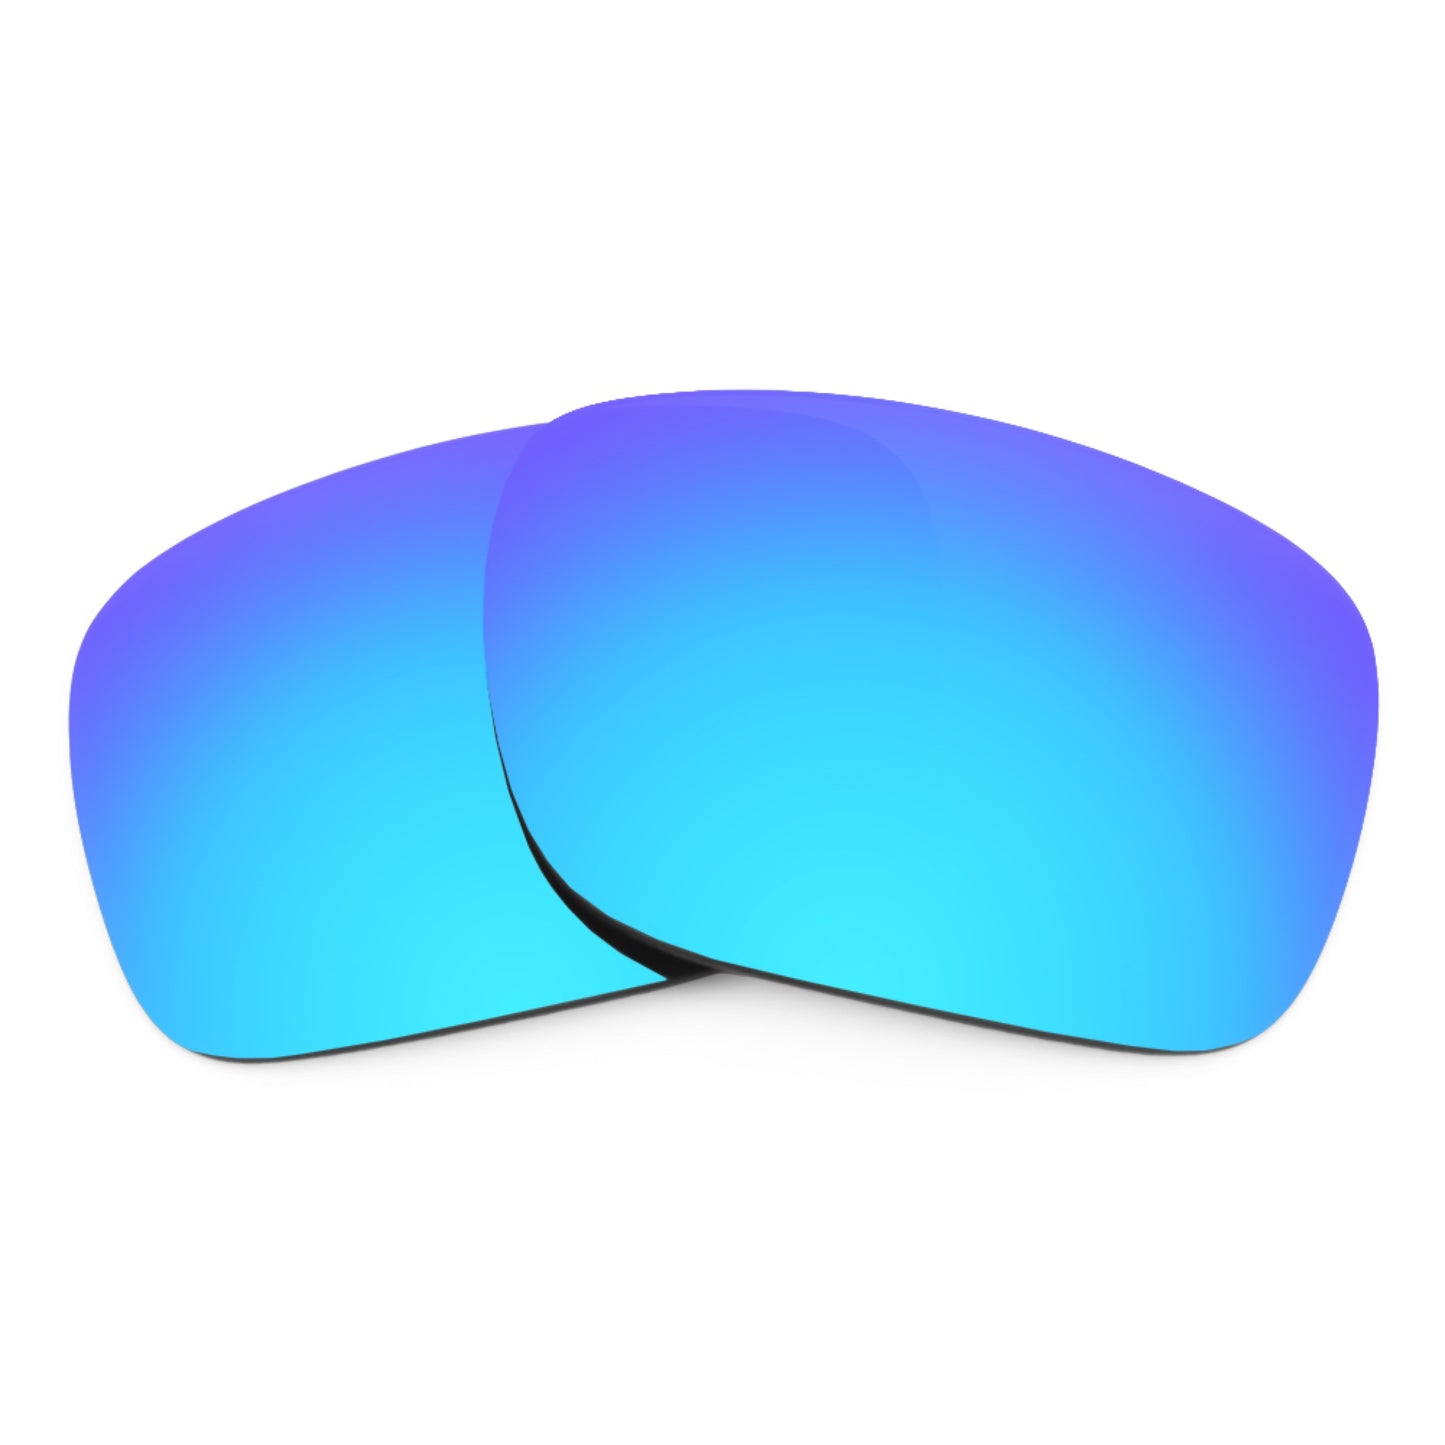 Revant replacement lenses for Ray-Ban Caravan RB3136 55mm Non-Polarized Ice Blue